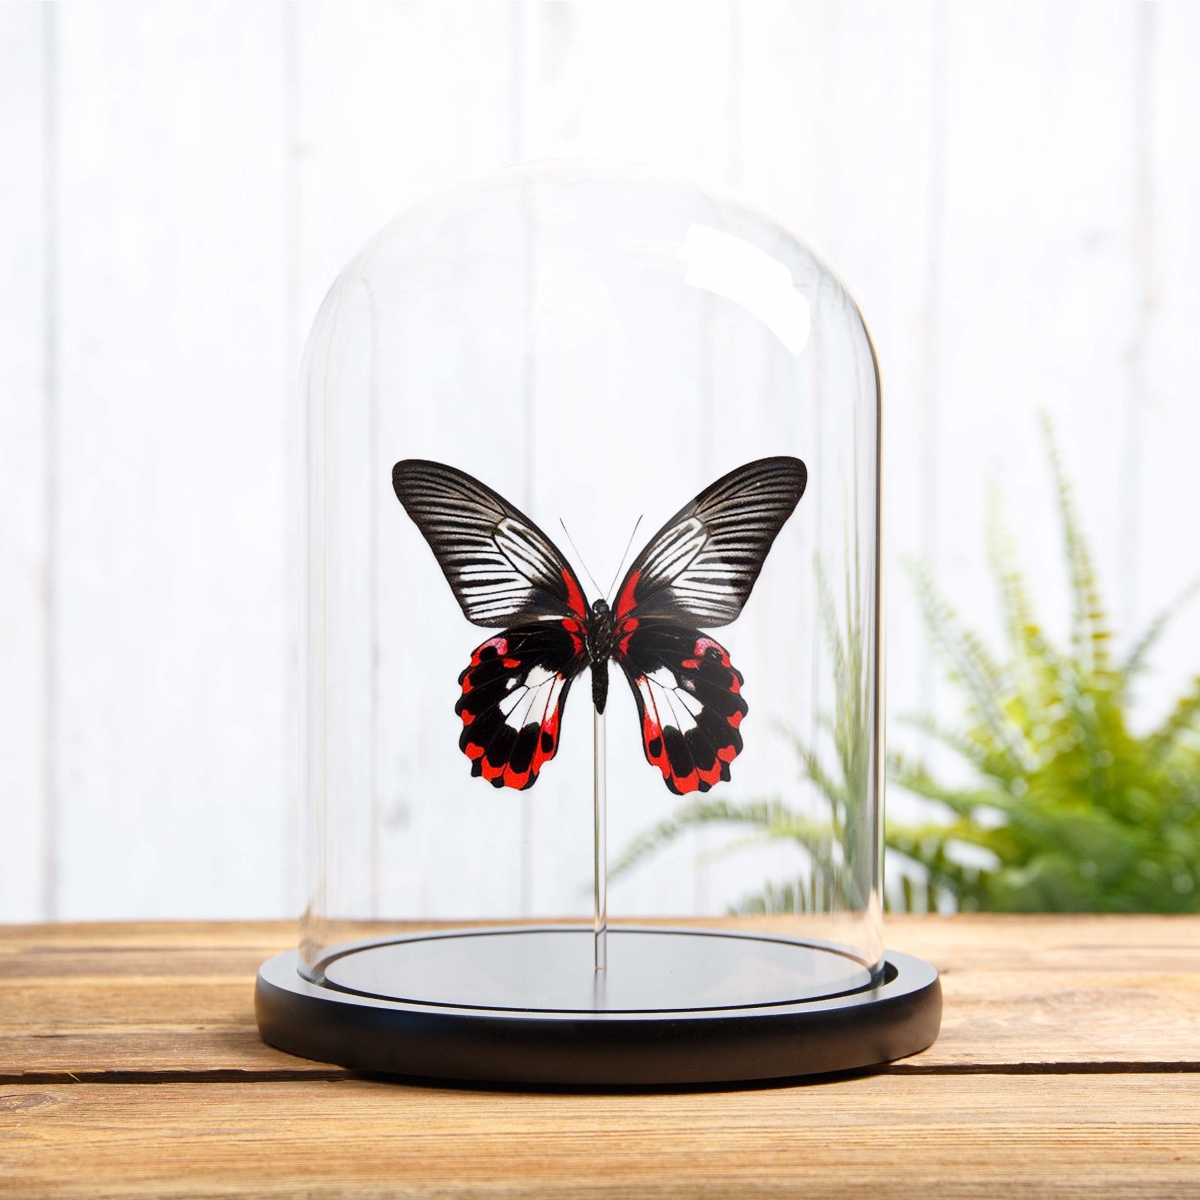 Minibeast Scarlet Mormon White Form in Glass Dome with Wooden Base (Papilio rumanzovia)